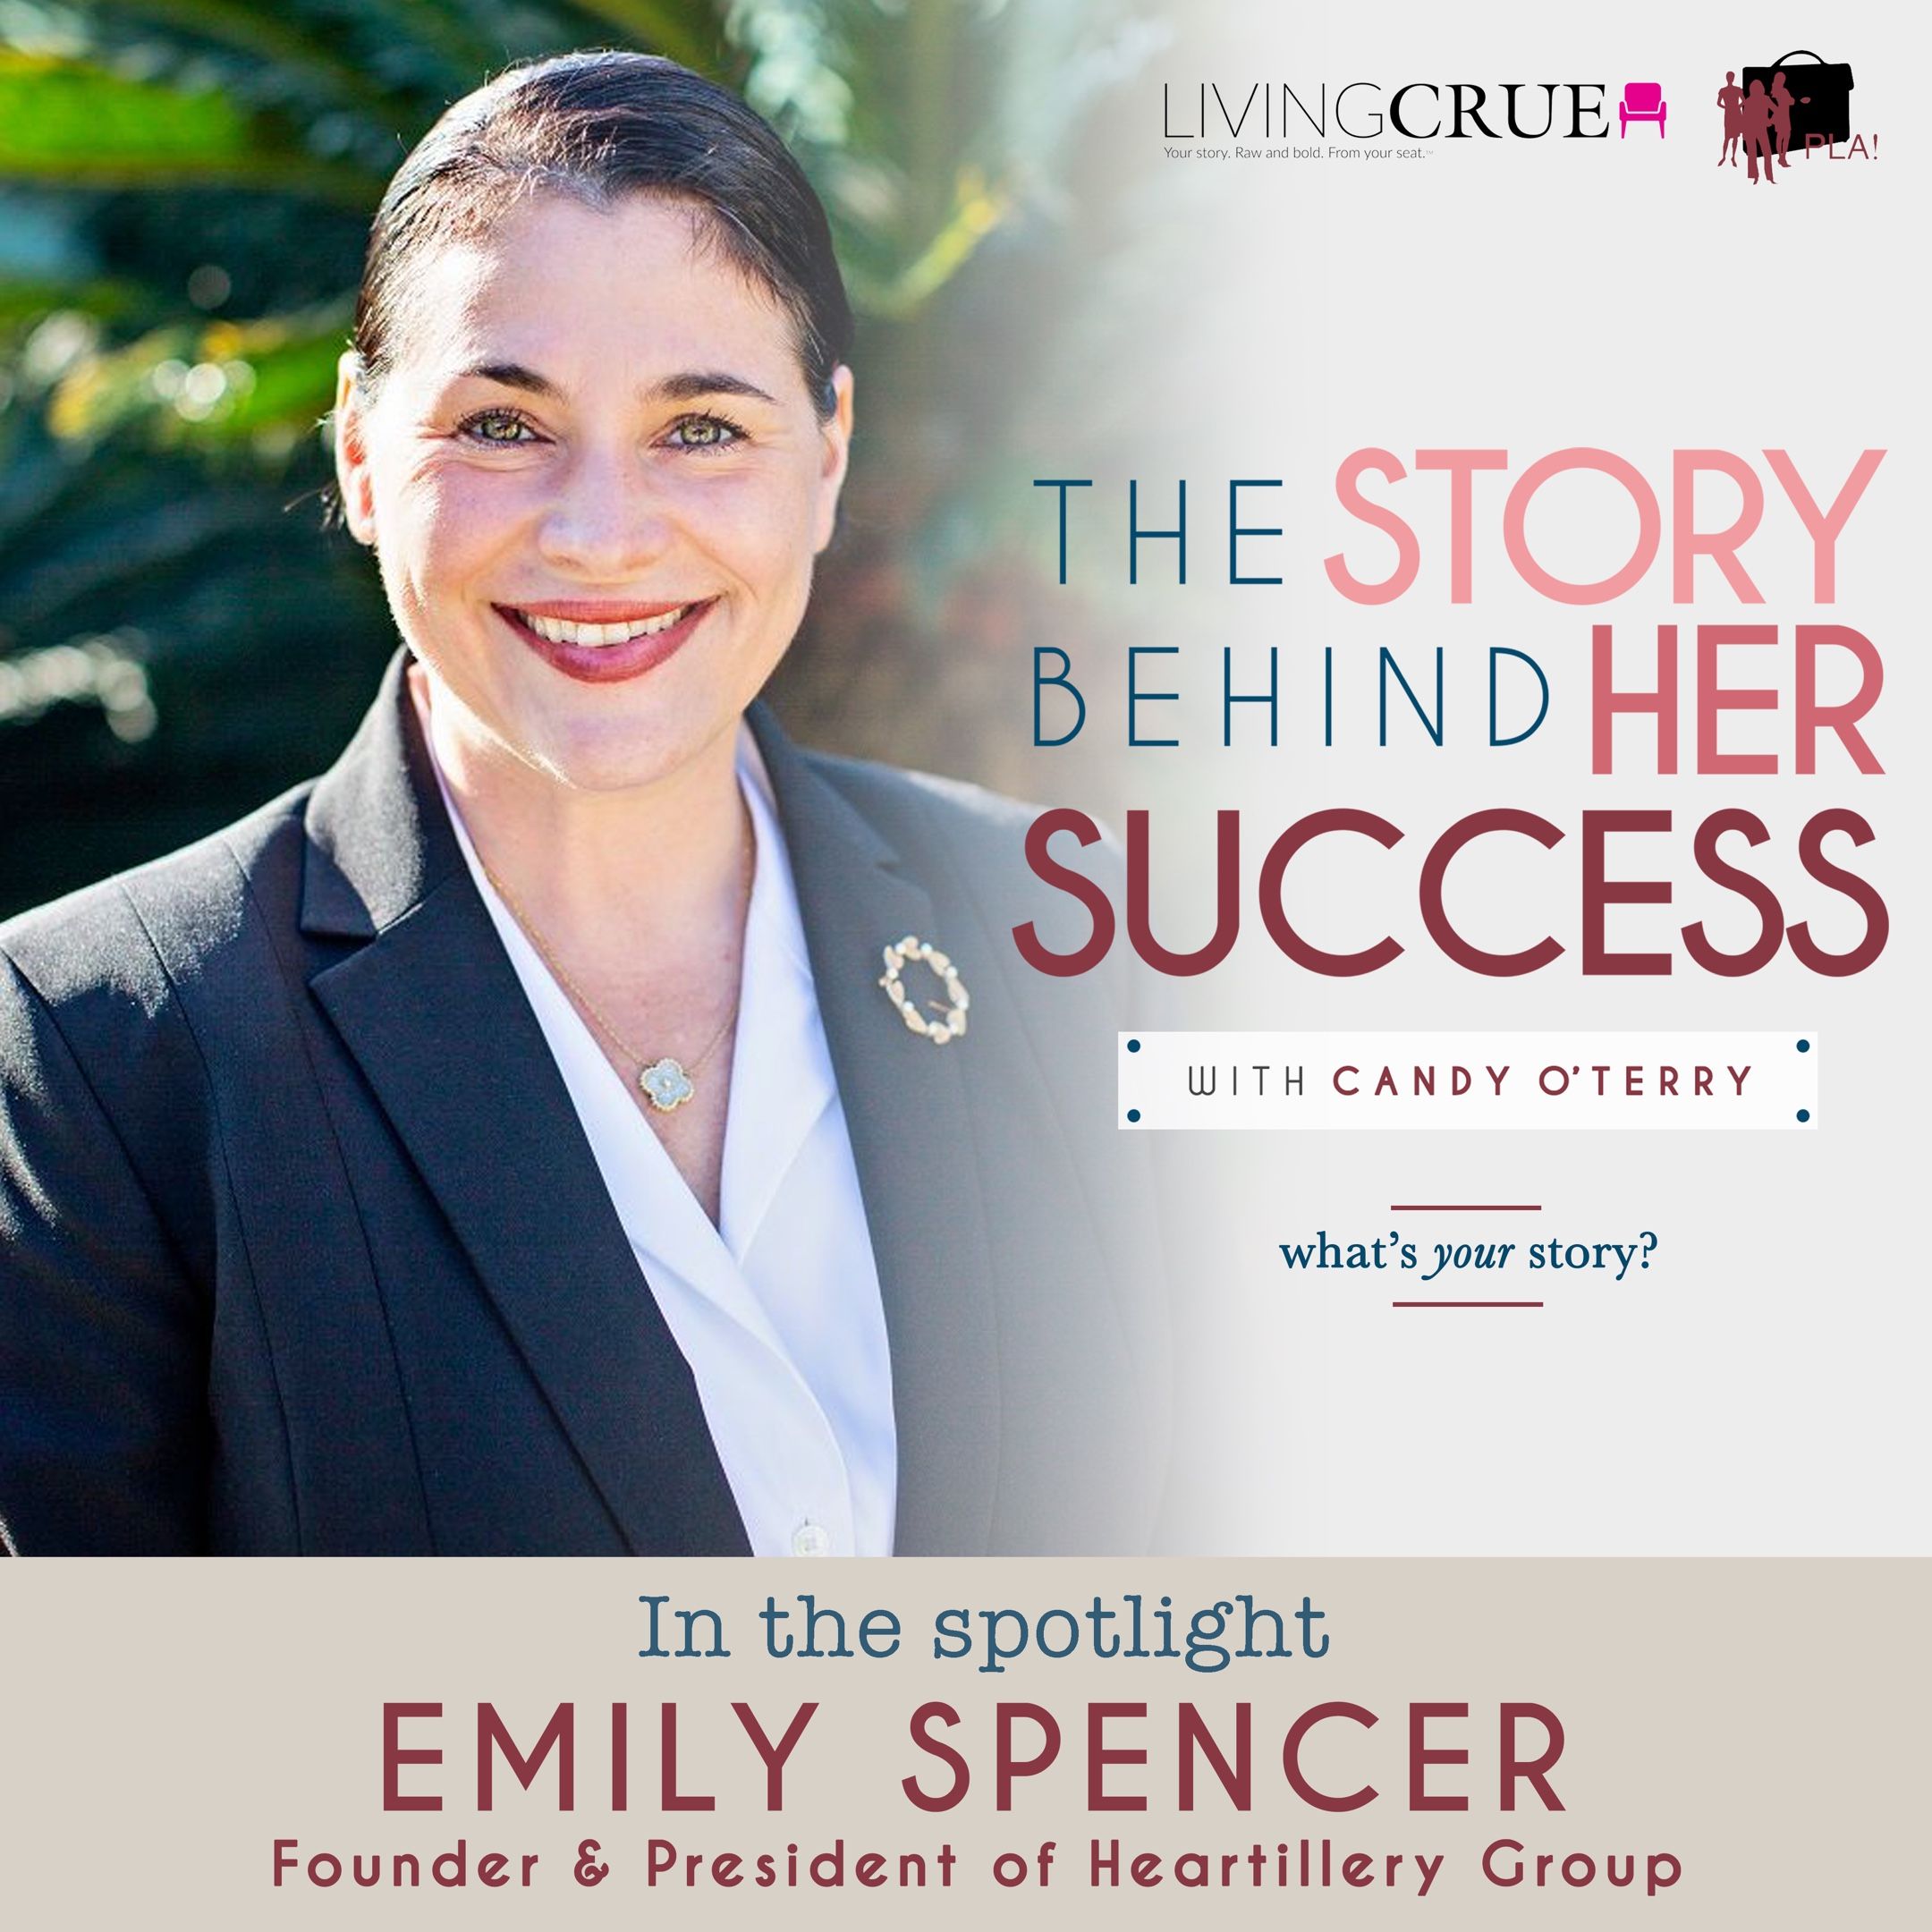 Candy O’Terry Interview with Heartillery Founder & President, Emily Spencer – The Story Behind Her Success